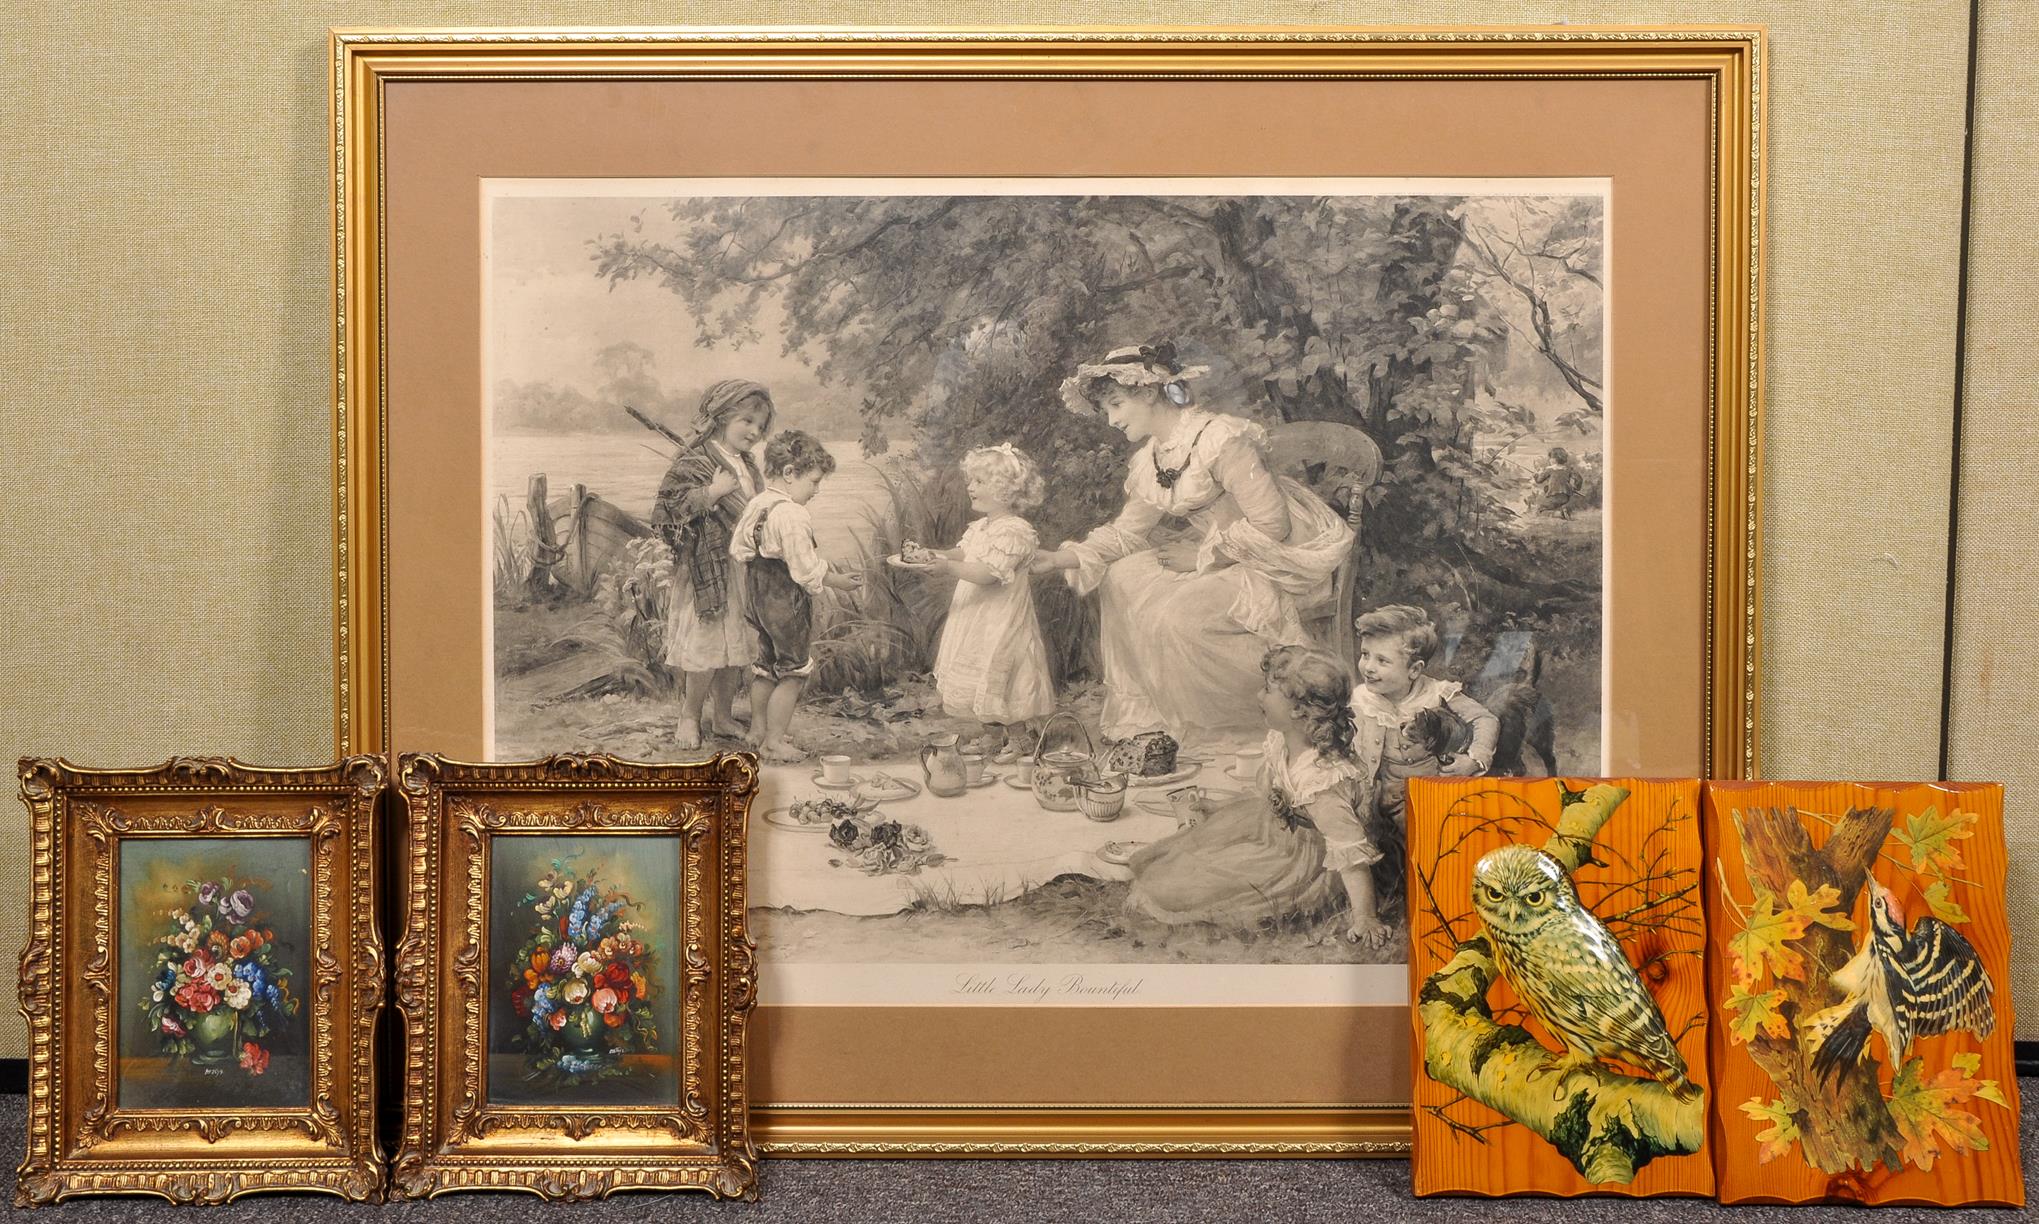 A 19th century portrait print along with two paint lacquered pin plaques and two prints